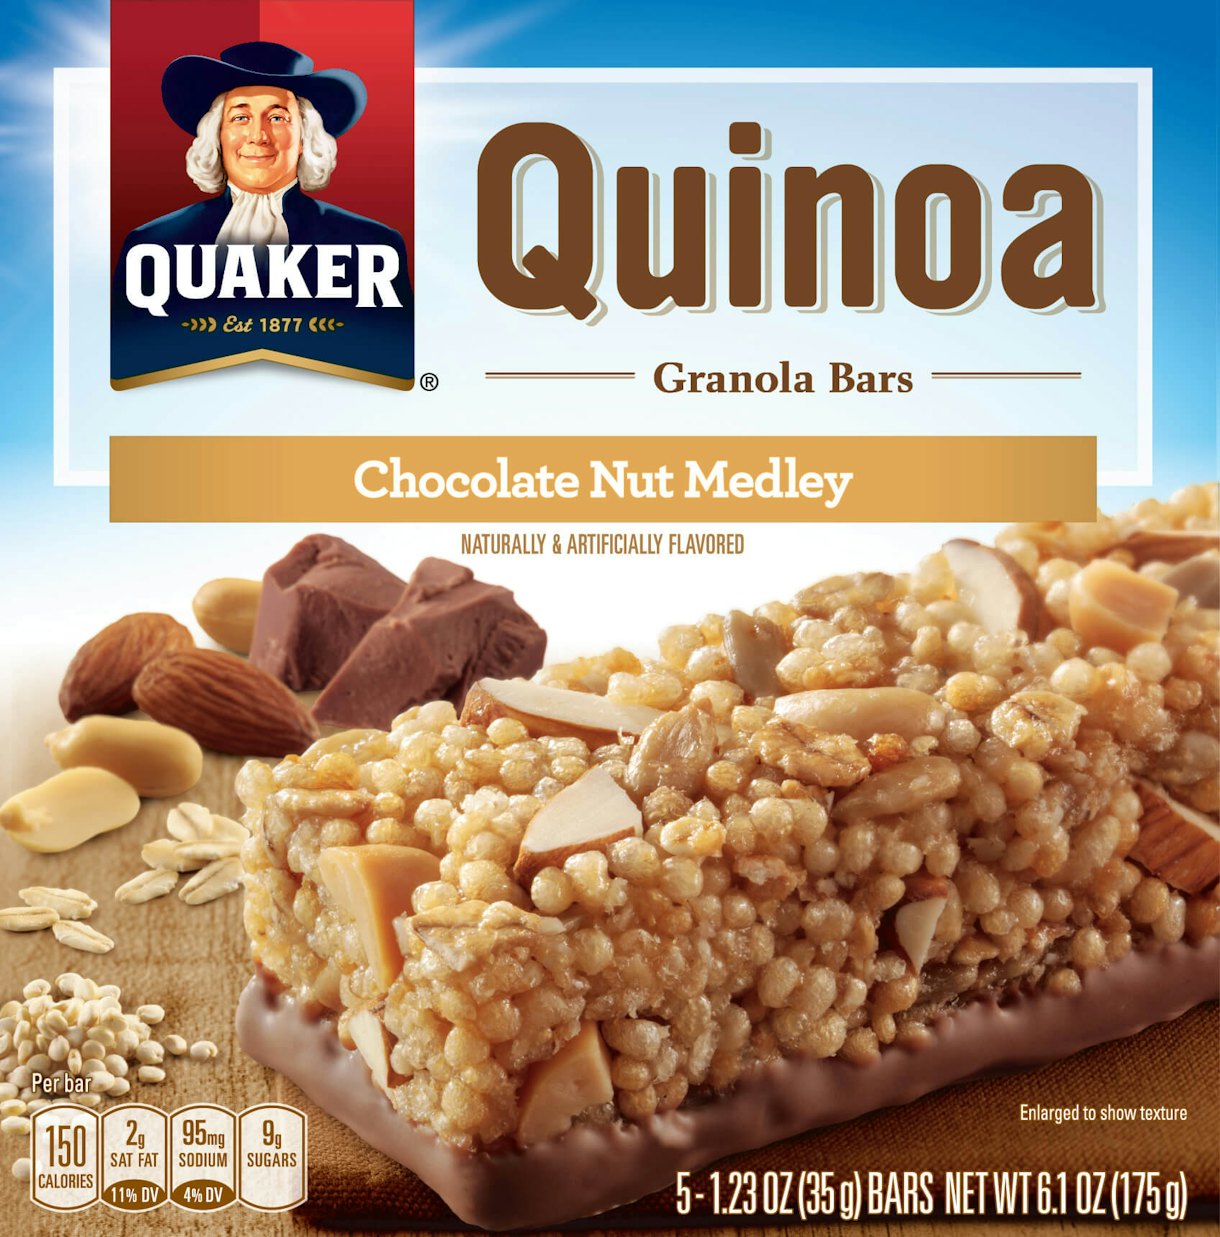 How To Tell If Your Quaker Oats Granola Bars Have Been Recalled Due To